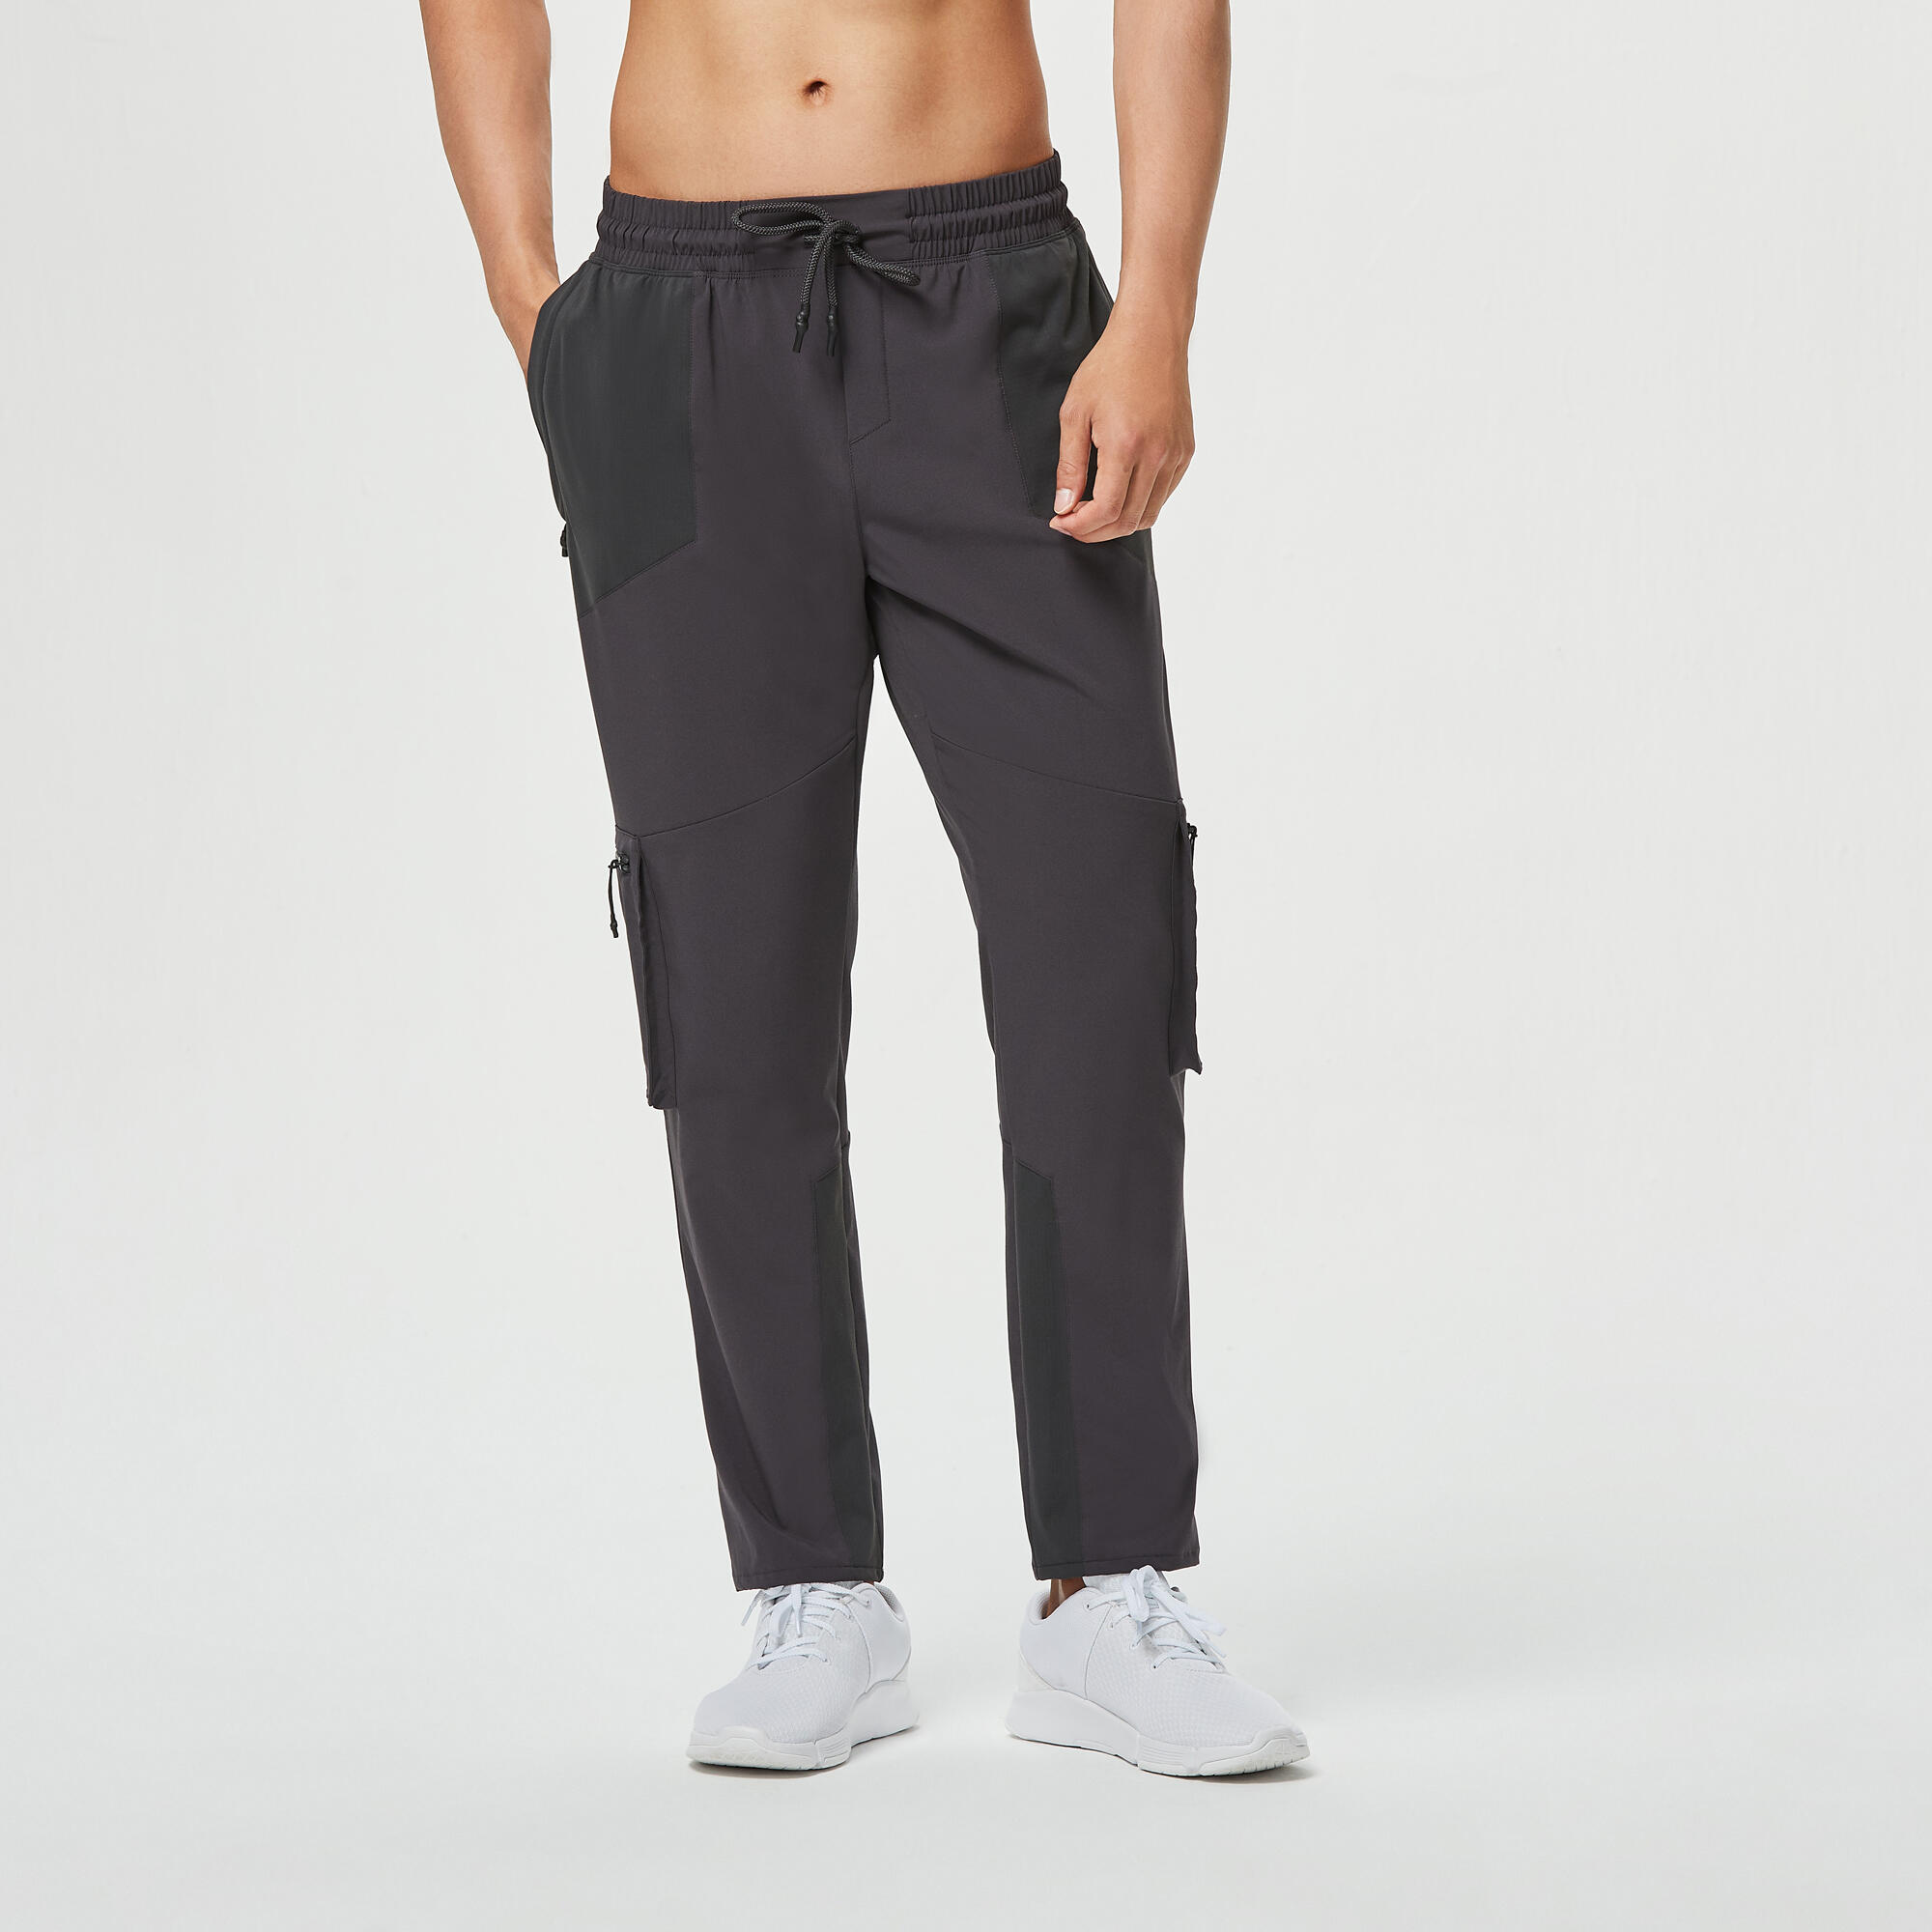 Male Mens Gym Cotton Track Pant, Grey And Black, XL at Rs 250/piece in  Meerut